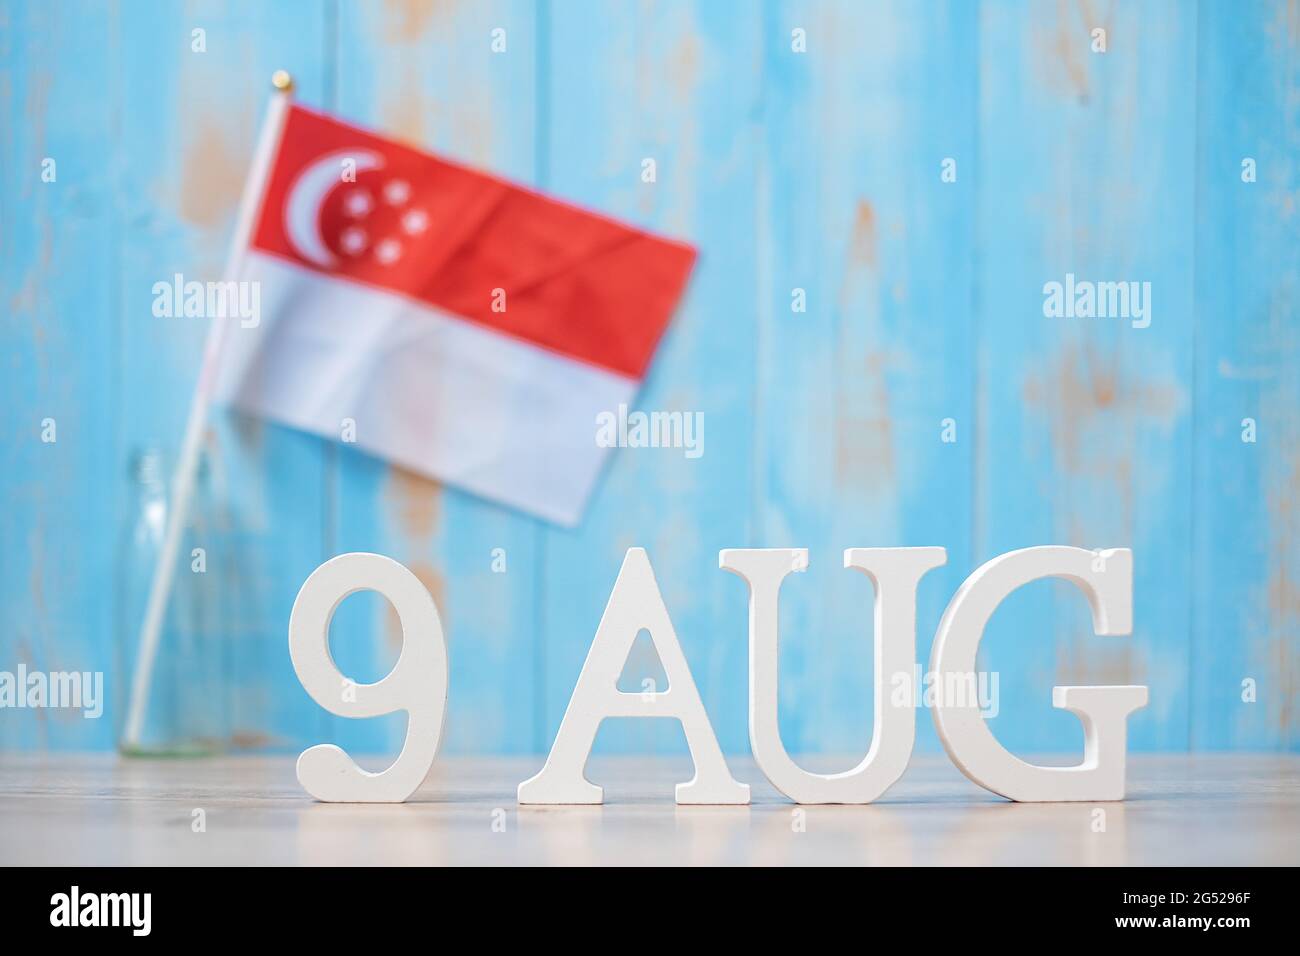 Wooden Text Of August 9th With Miniature Singapore Flags Singapore Independence Day City State National Day And Happy Celebration Republic Concepts Stock Photo Alamy